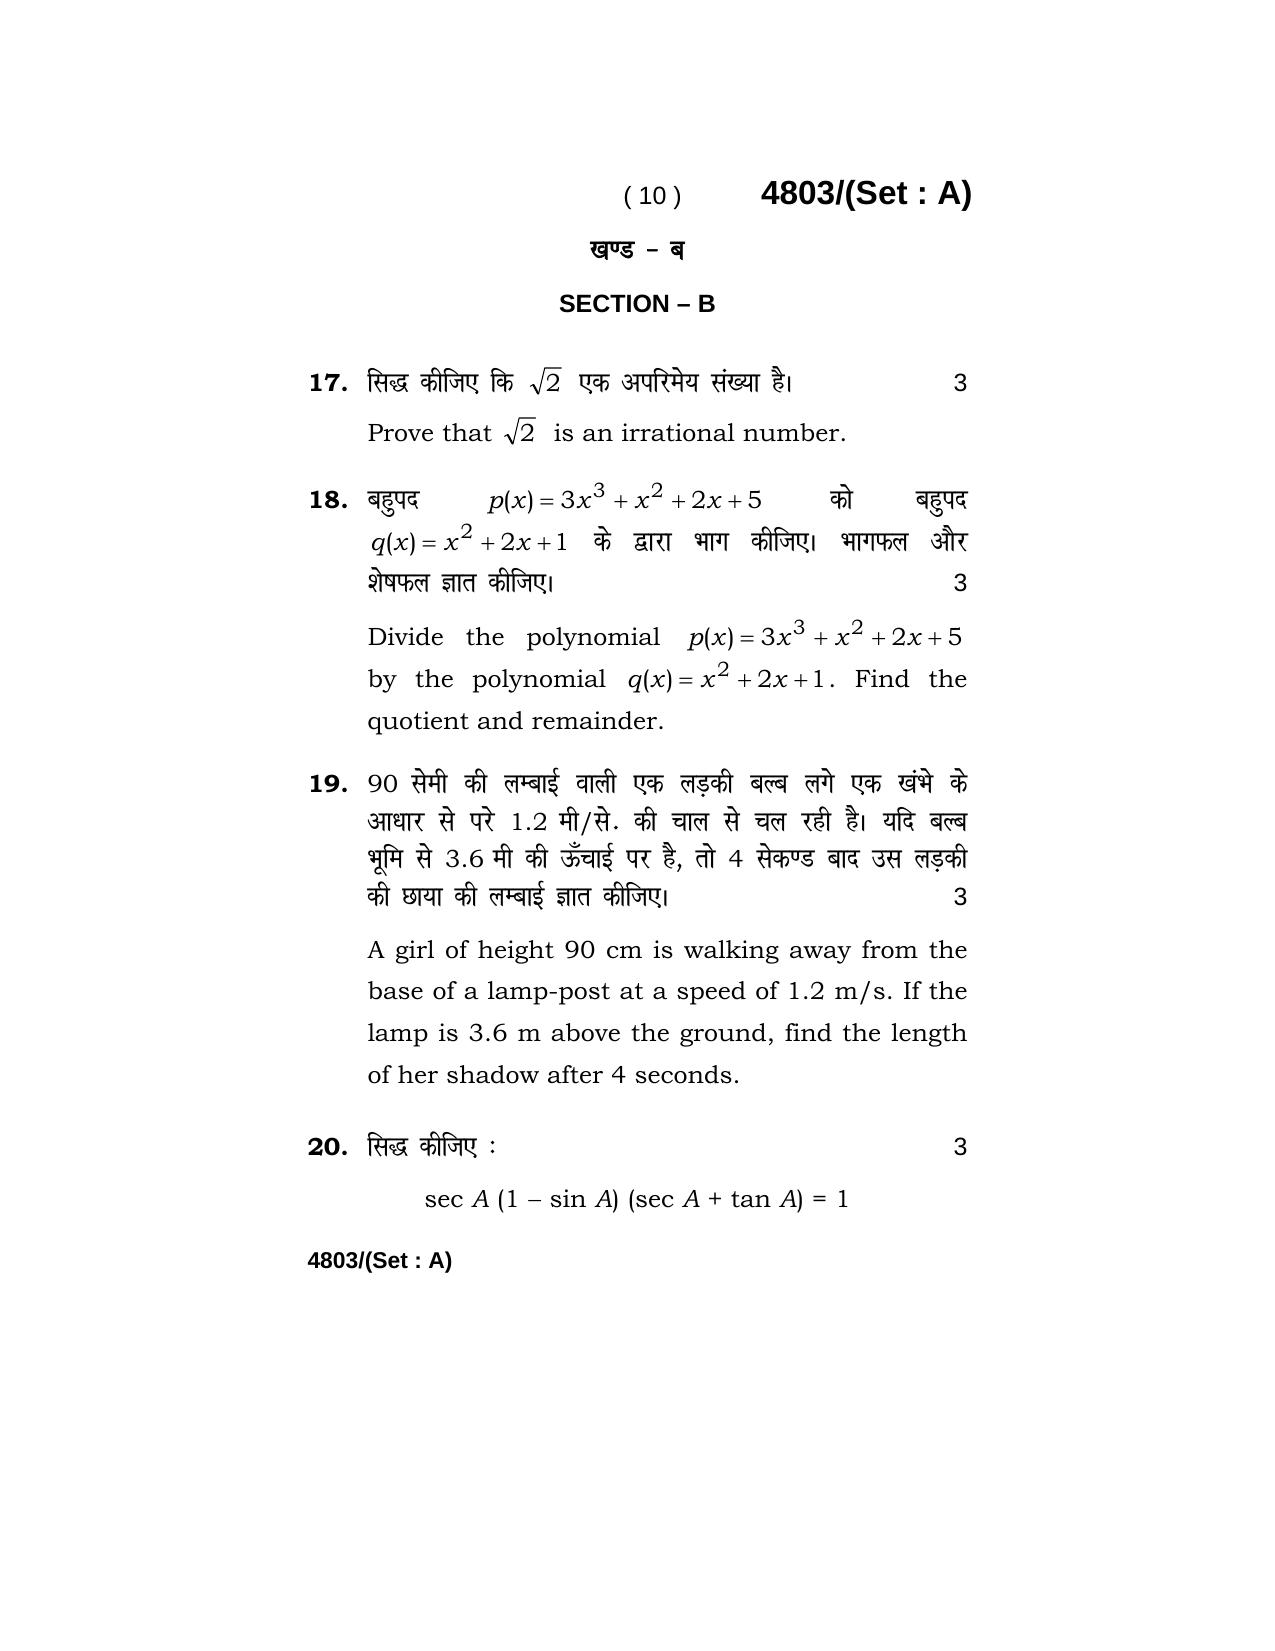 Haryana Board HBSE Class 10 Mathematics 2020 Question Paper - Page 10